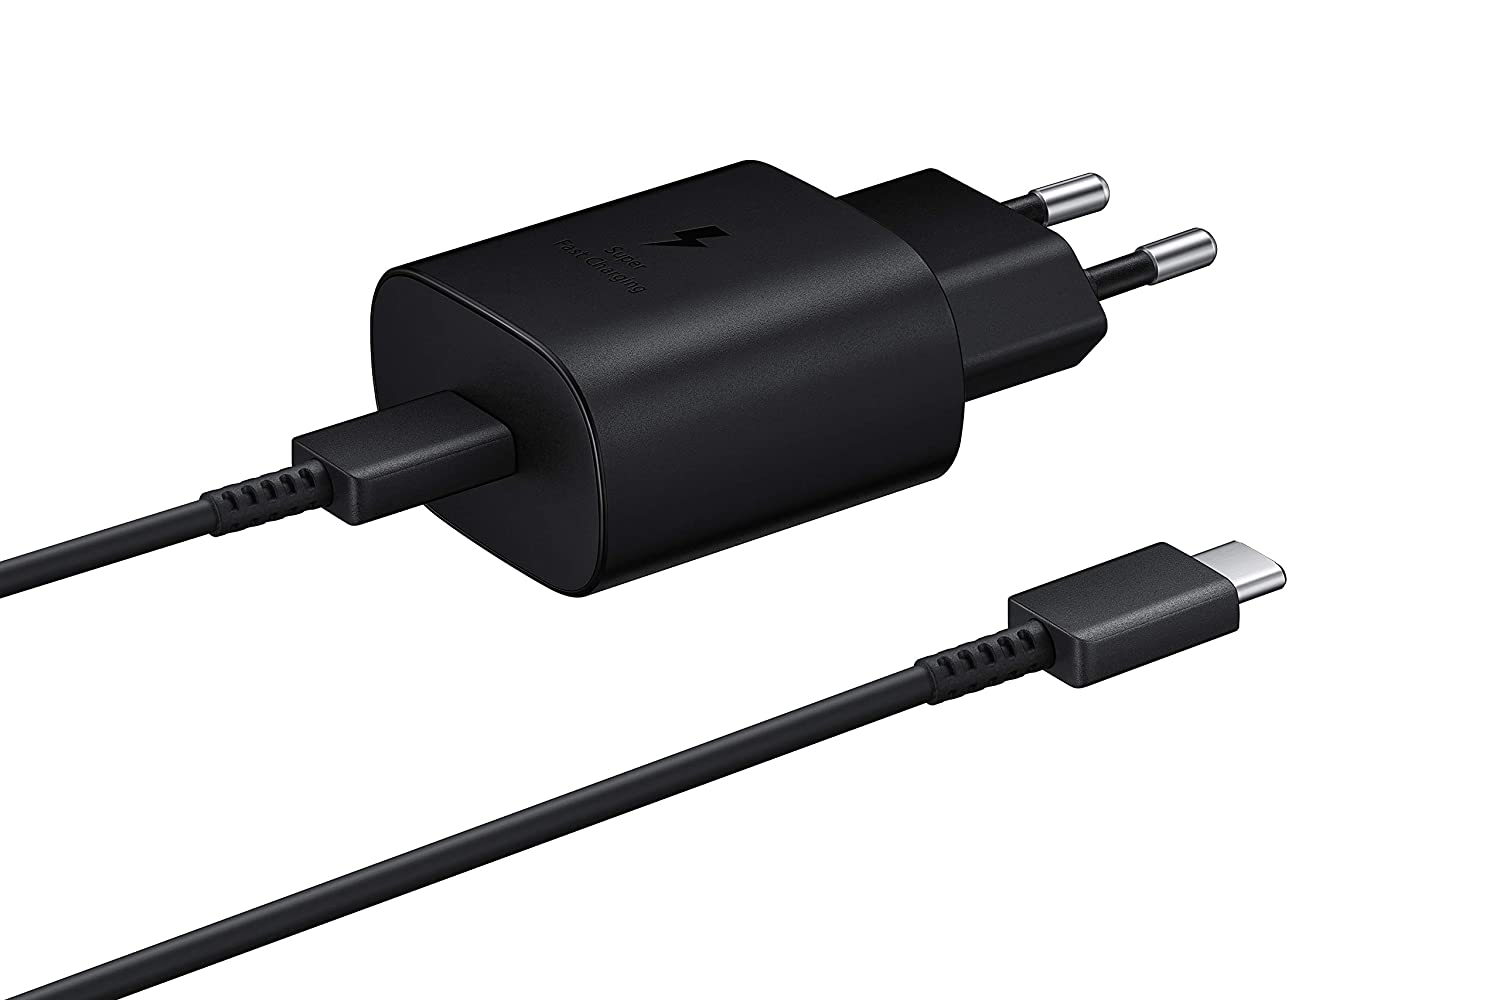 Samsung M53 5G 25W Super Fast USB-C PD Charger With C TO C Cable (Black)